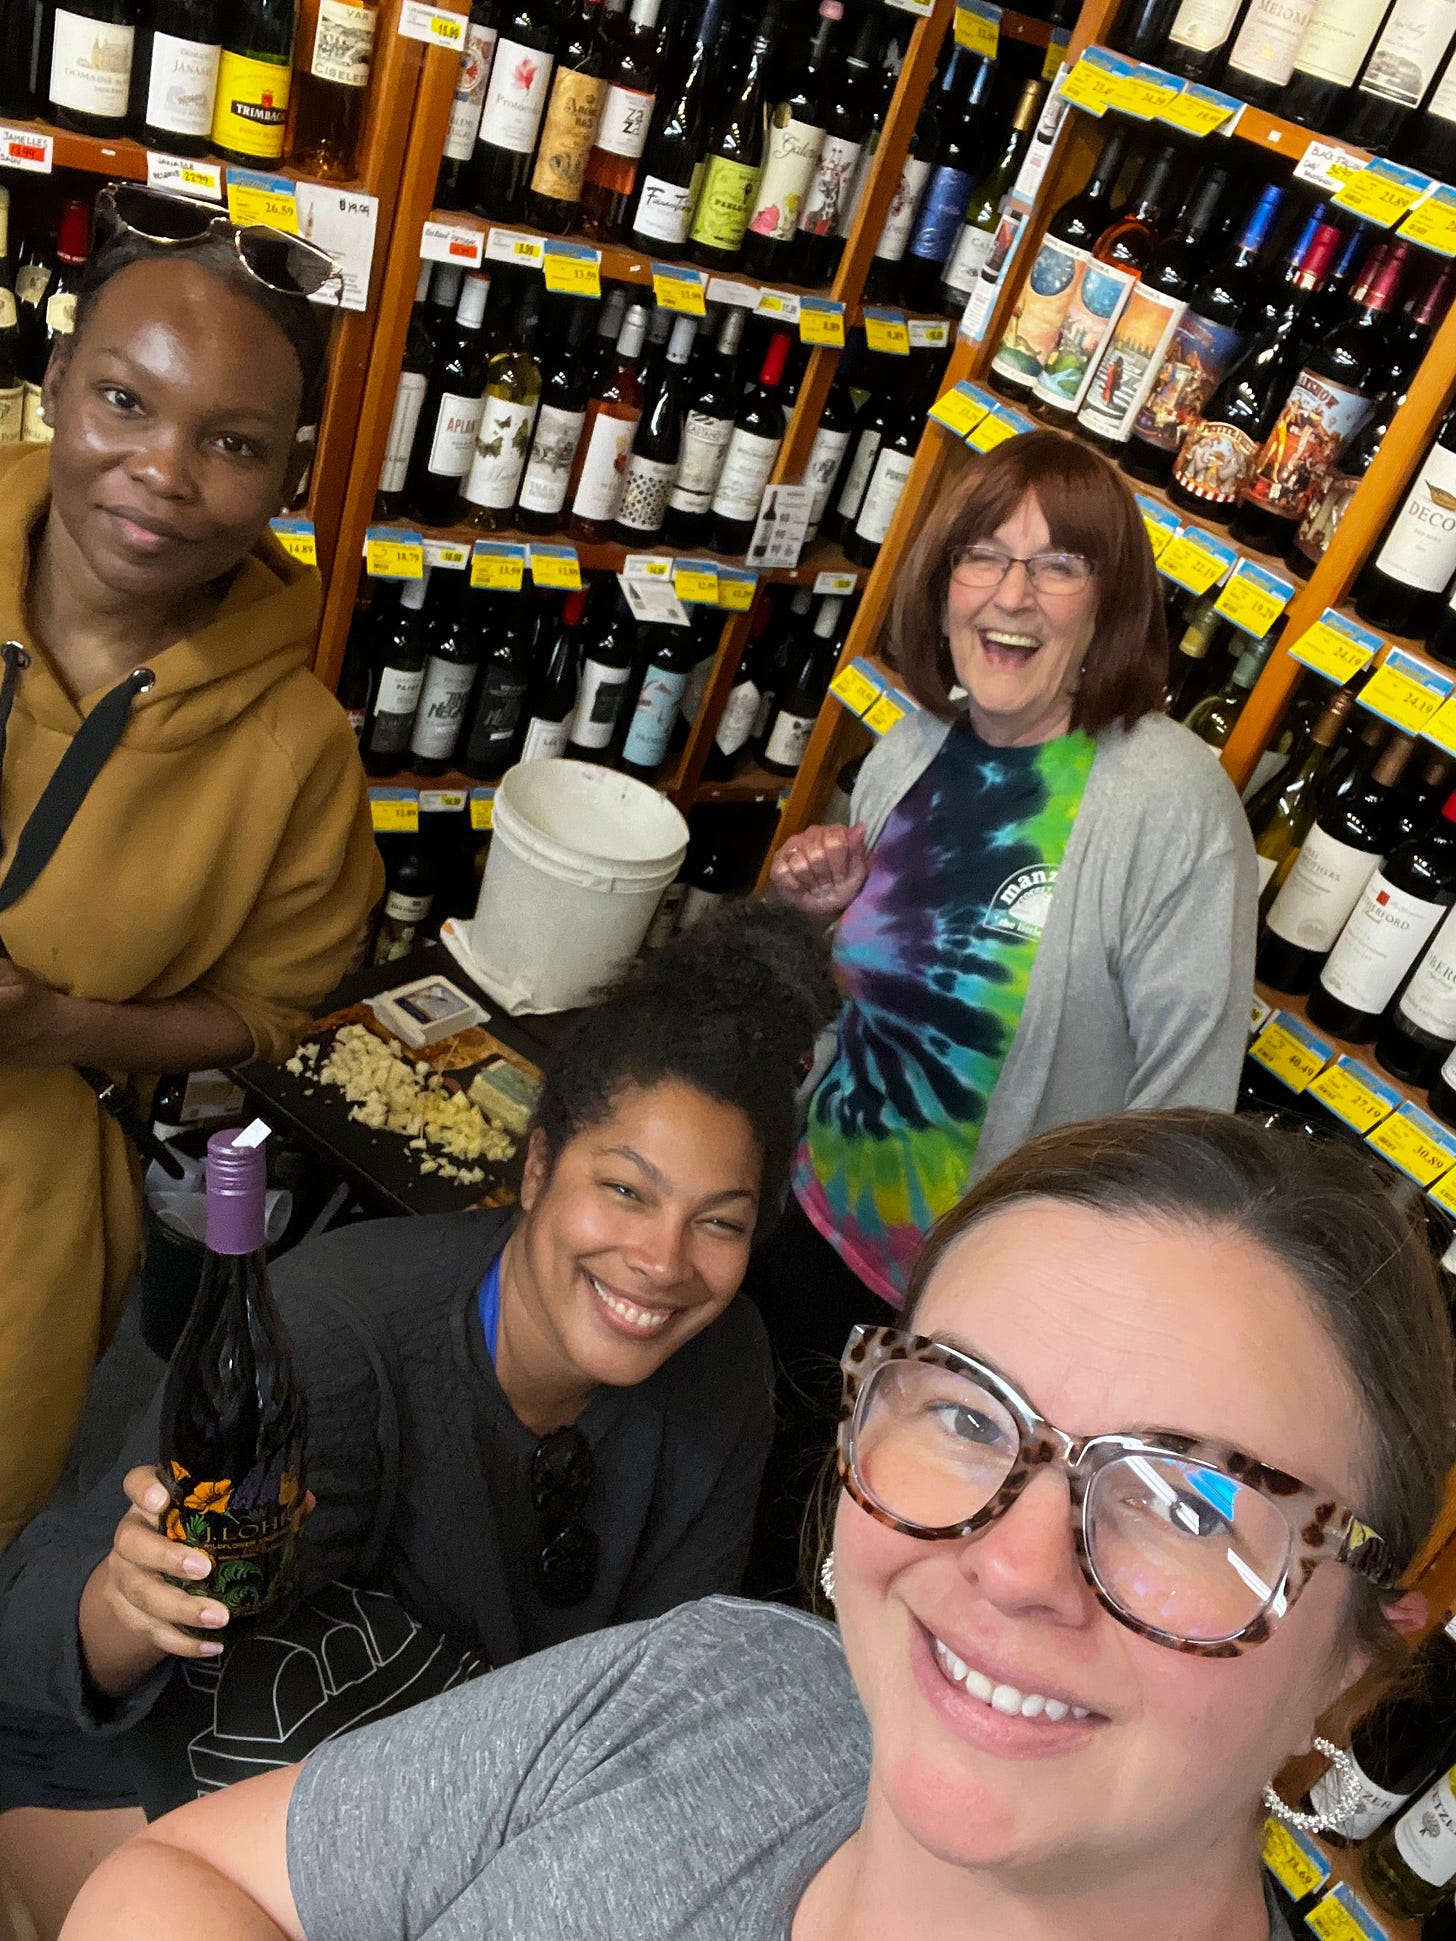 Nafissa, Jan, Jackie, and Amber take a group selfie together in a grocery store. Behind them, shelves of wine bottles can be seen as well as a small table for wine tasting. Jackie holds a wine bottle up. Everyone smiles.